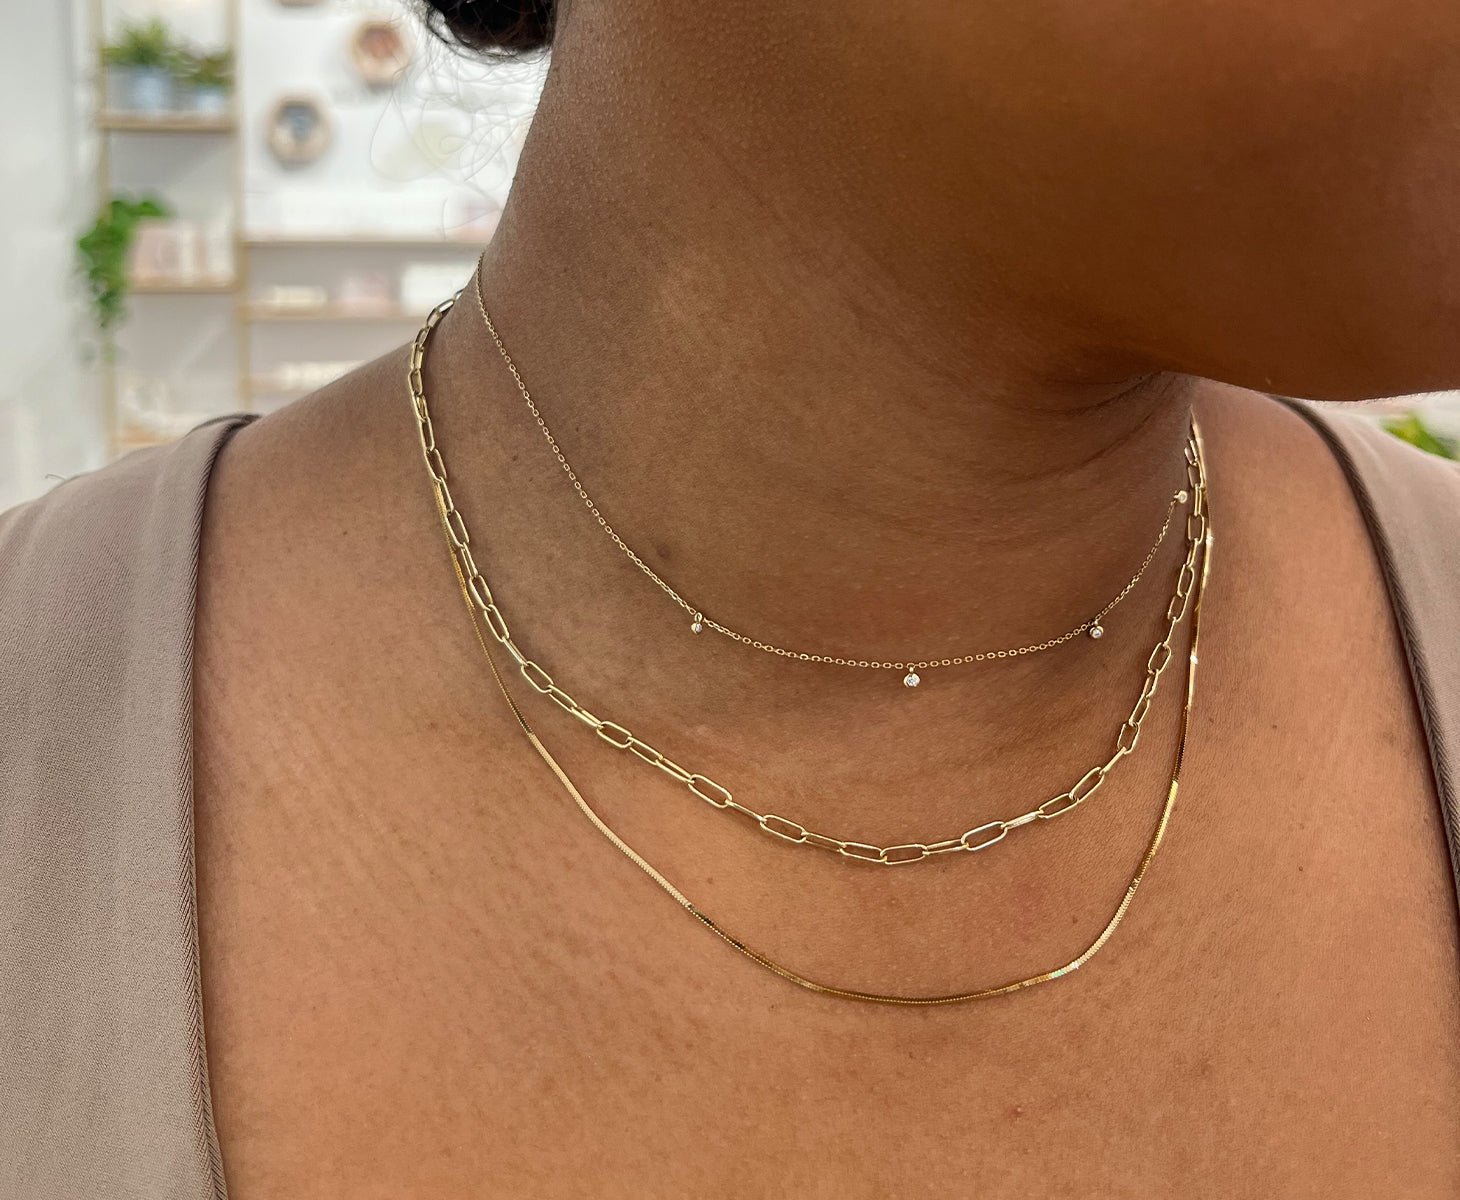 Woman wearing a 14k gold necklace and gold plated layered necklaces.